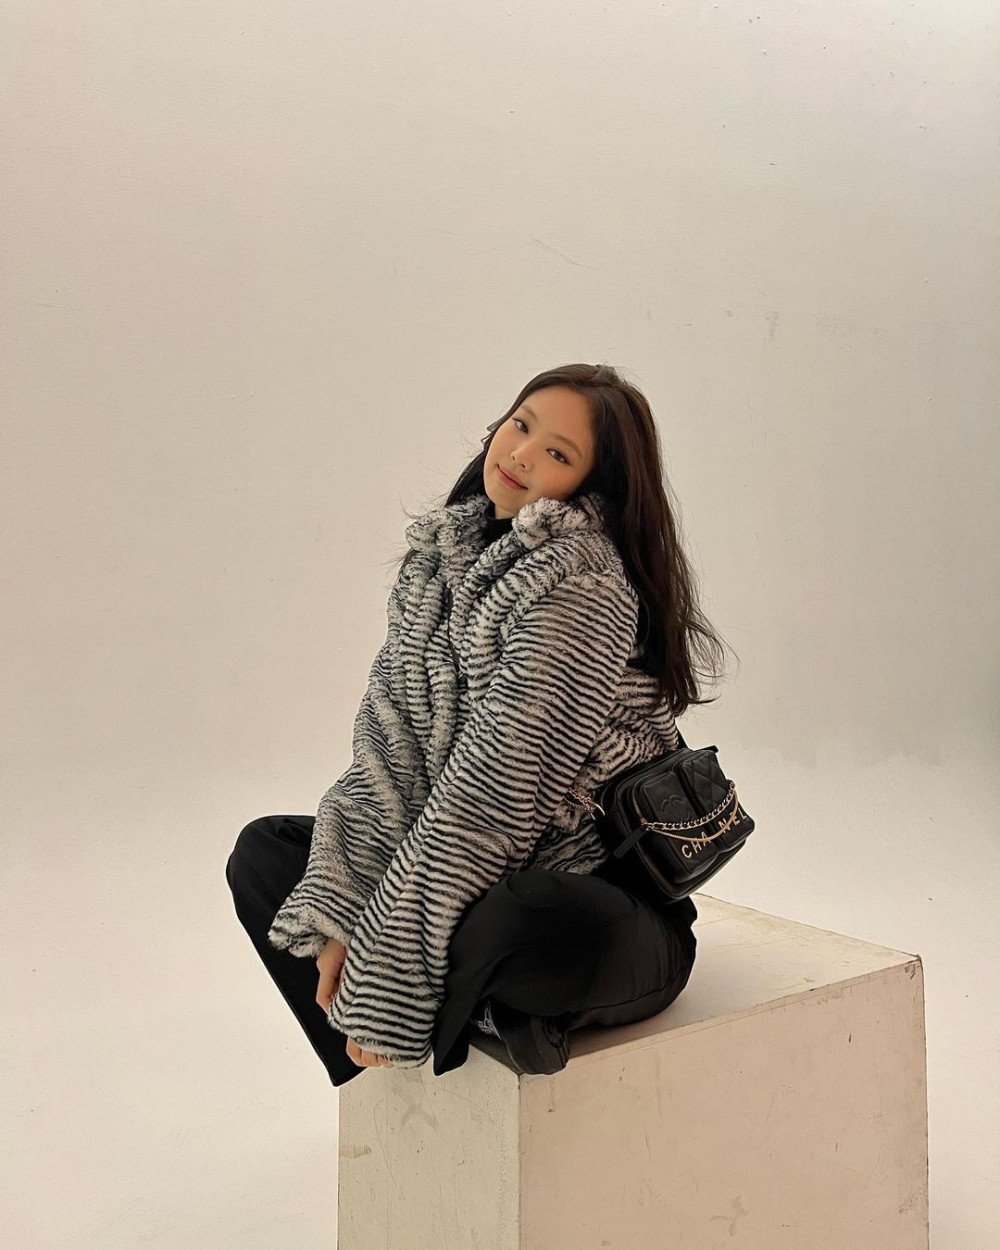 How does Blackpink's Jennie afford all of her clothes? - Quora